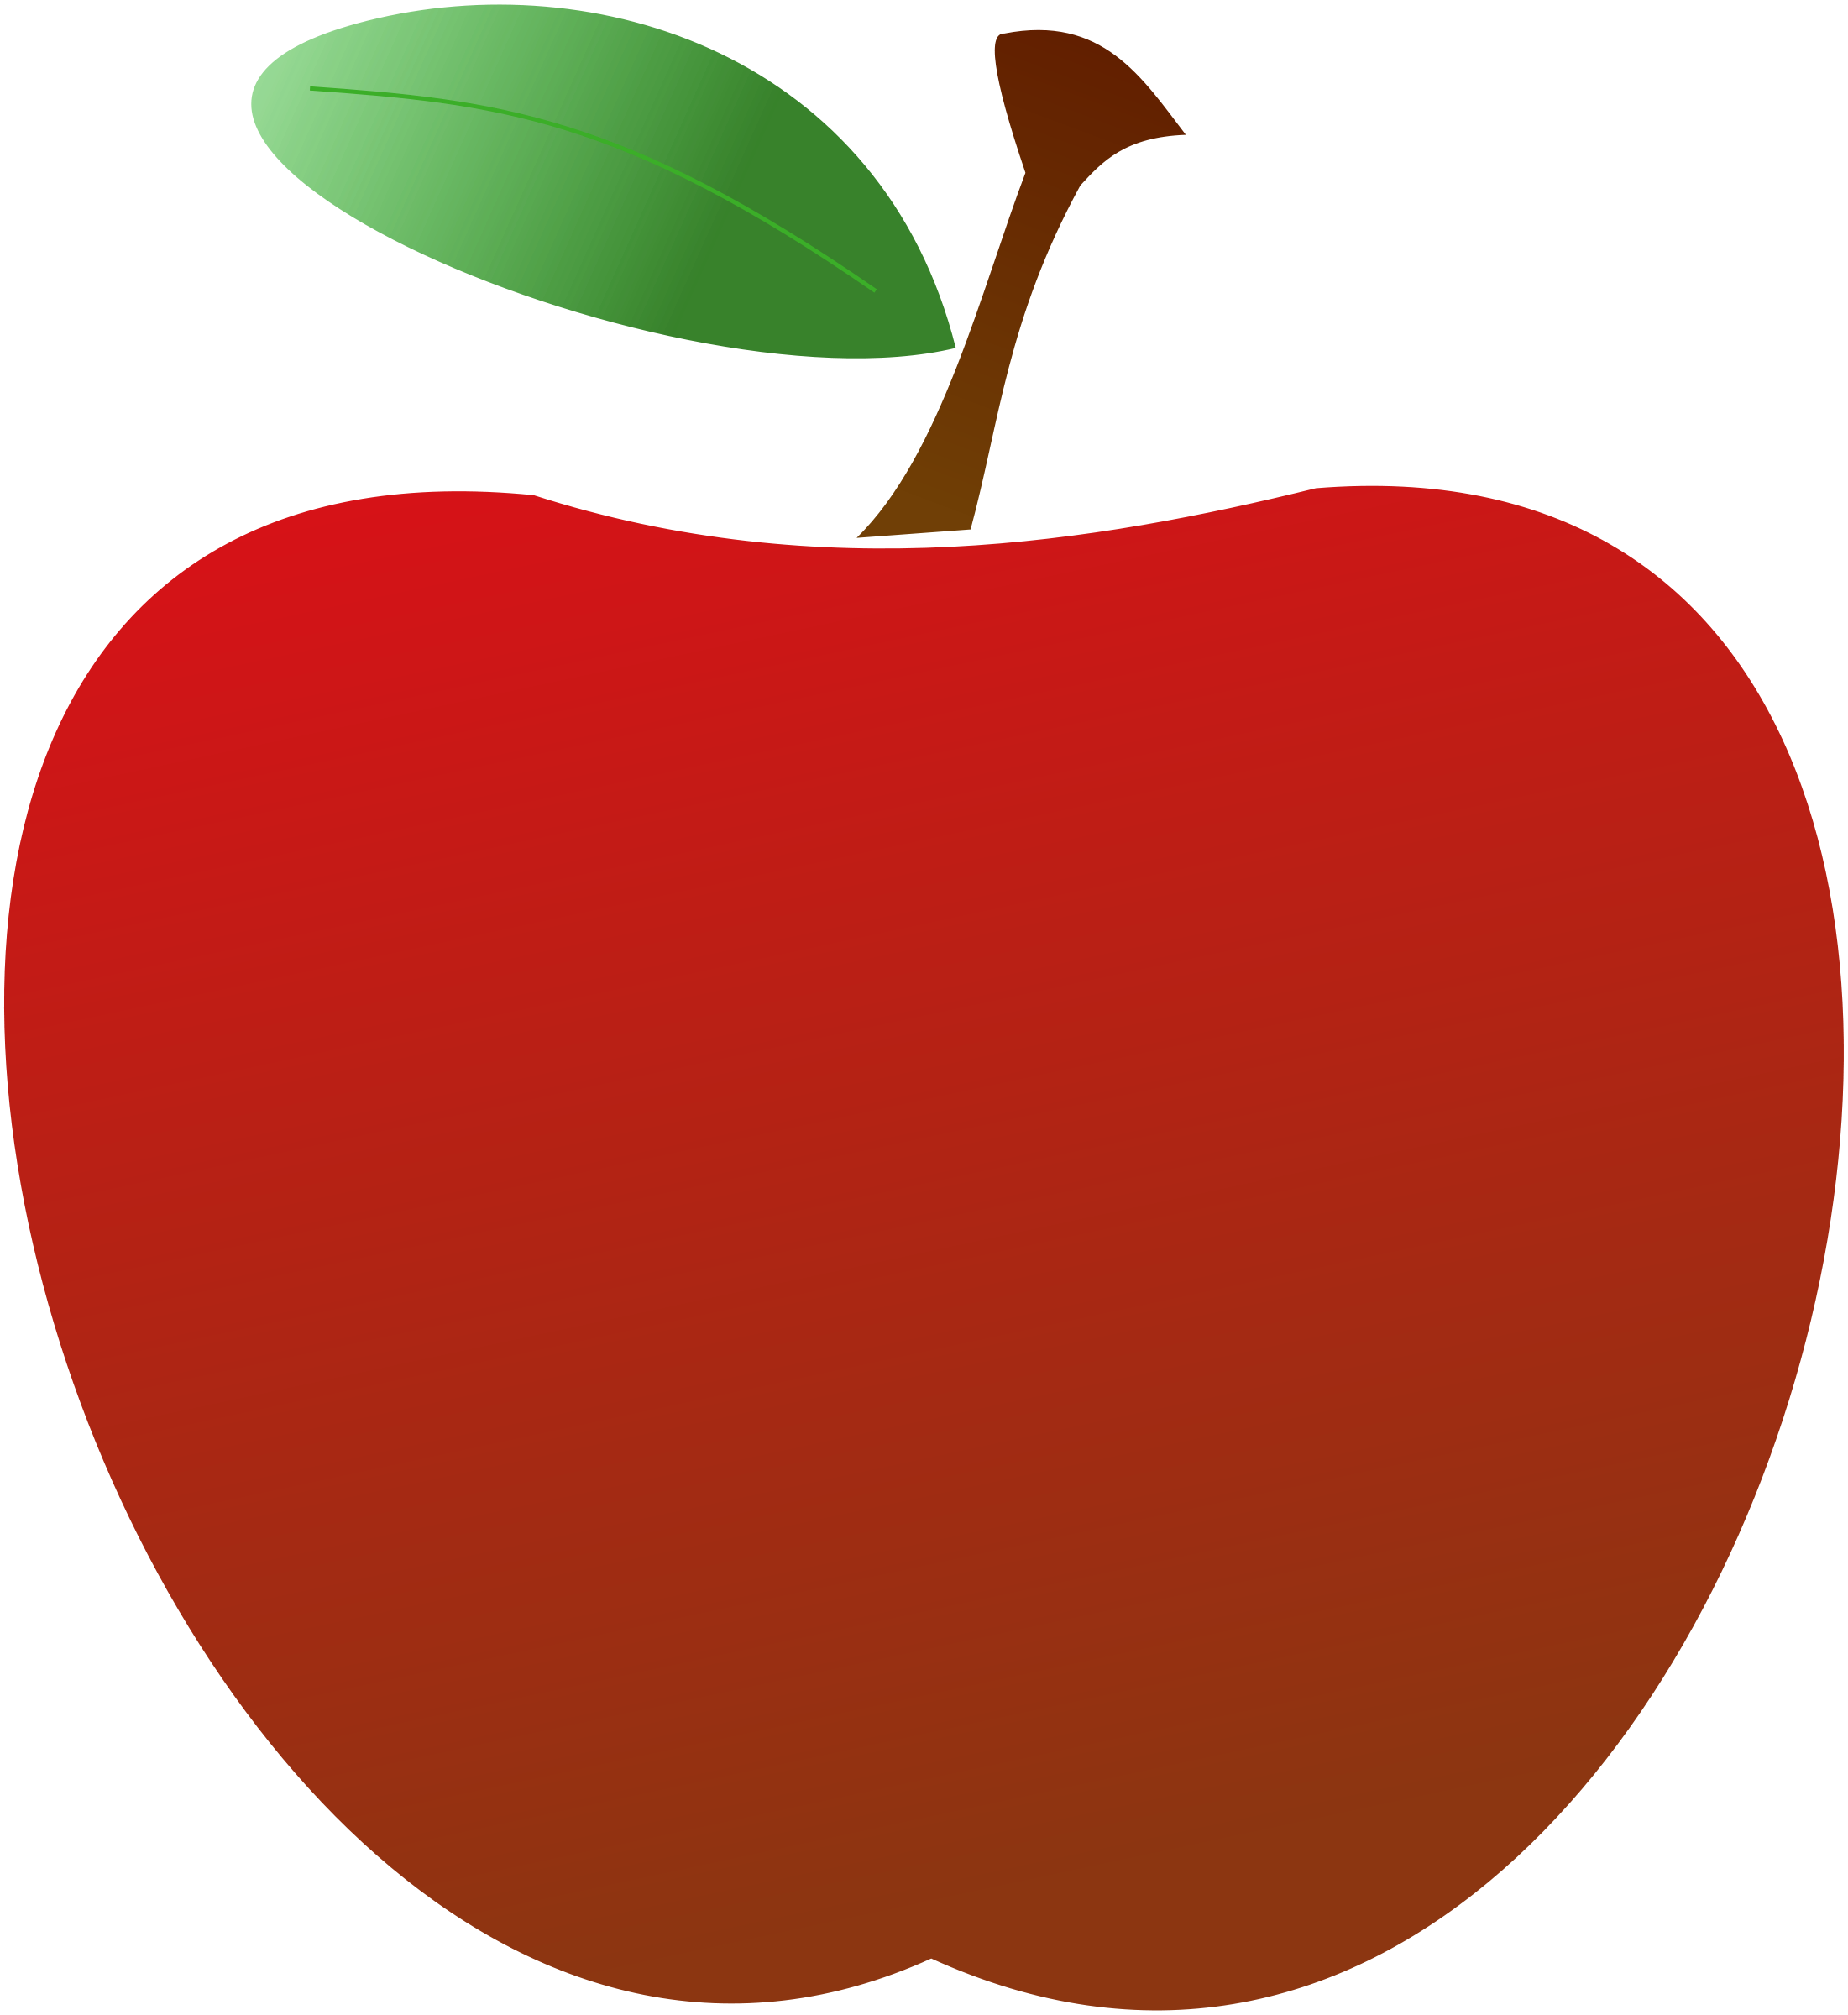 red apple clipart | Hostted